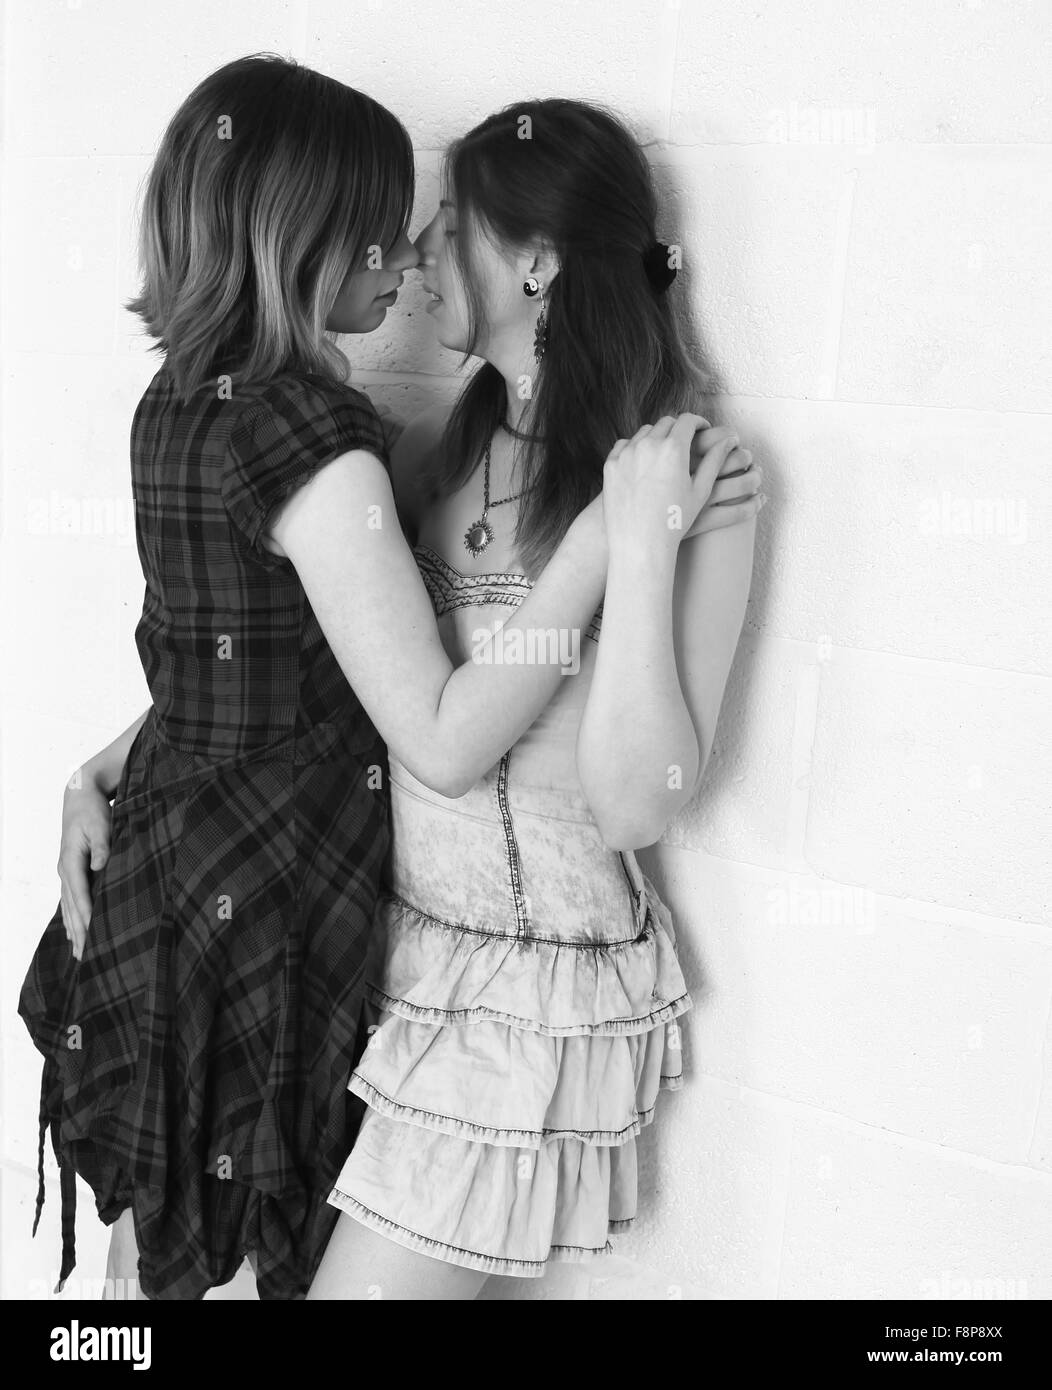 Two affectionate girls together, Stock Photo